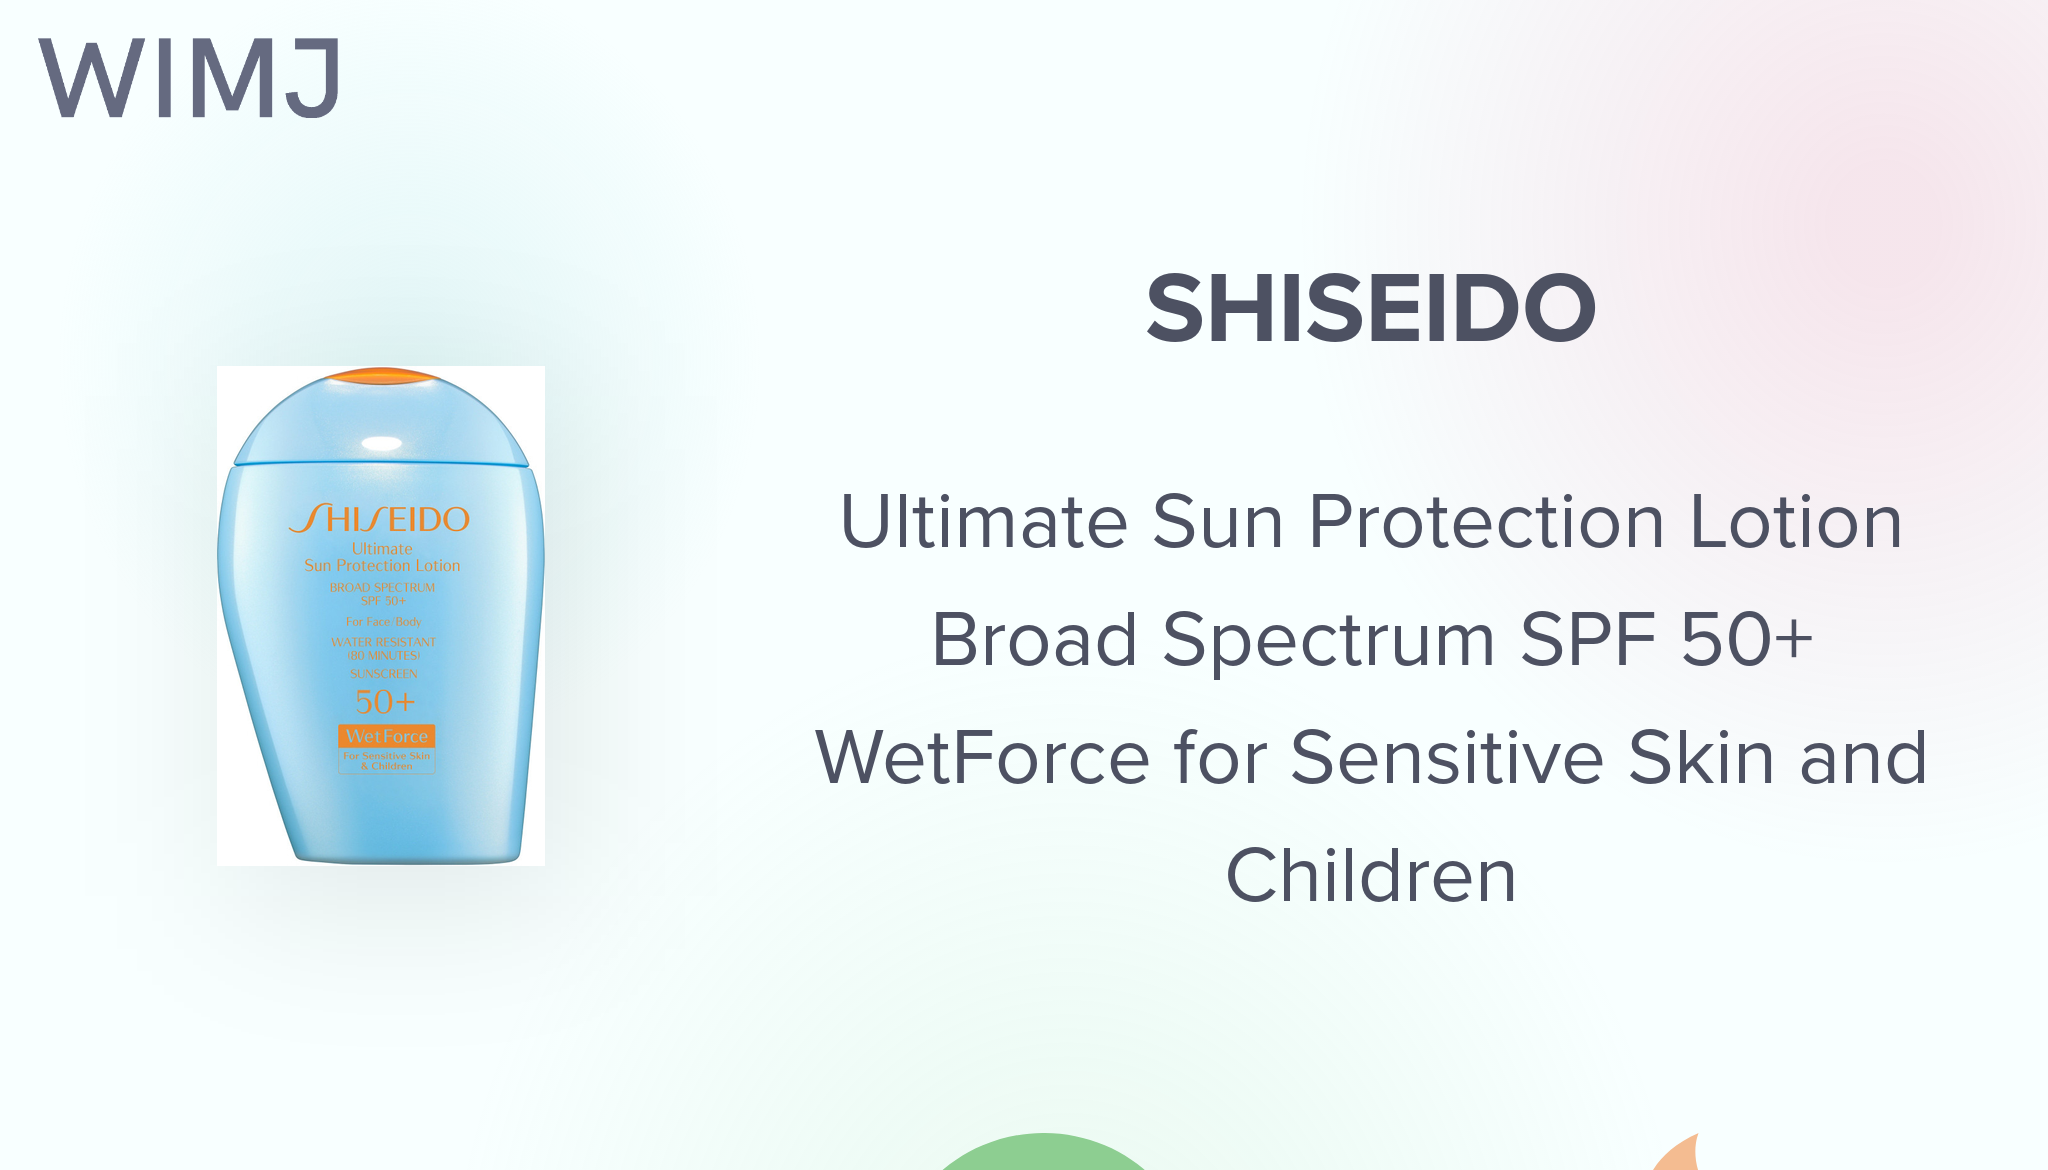 Ultimate Sun Protection Lotion Broad Spectrum SPF 50+ WetForce for